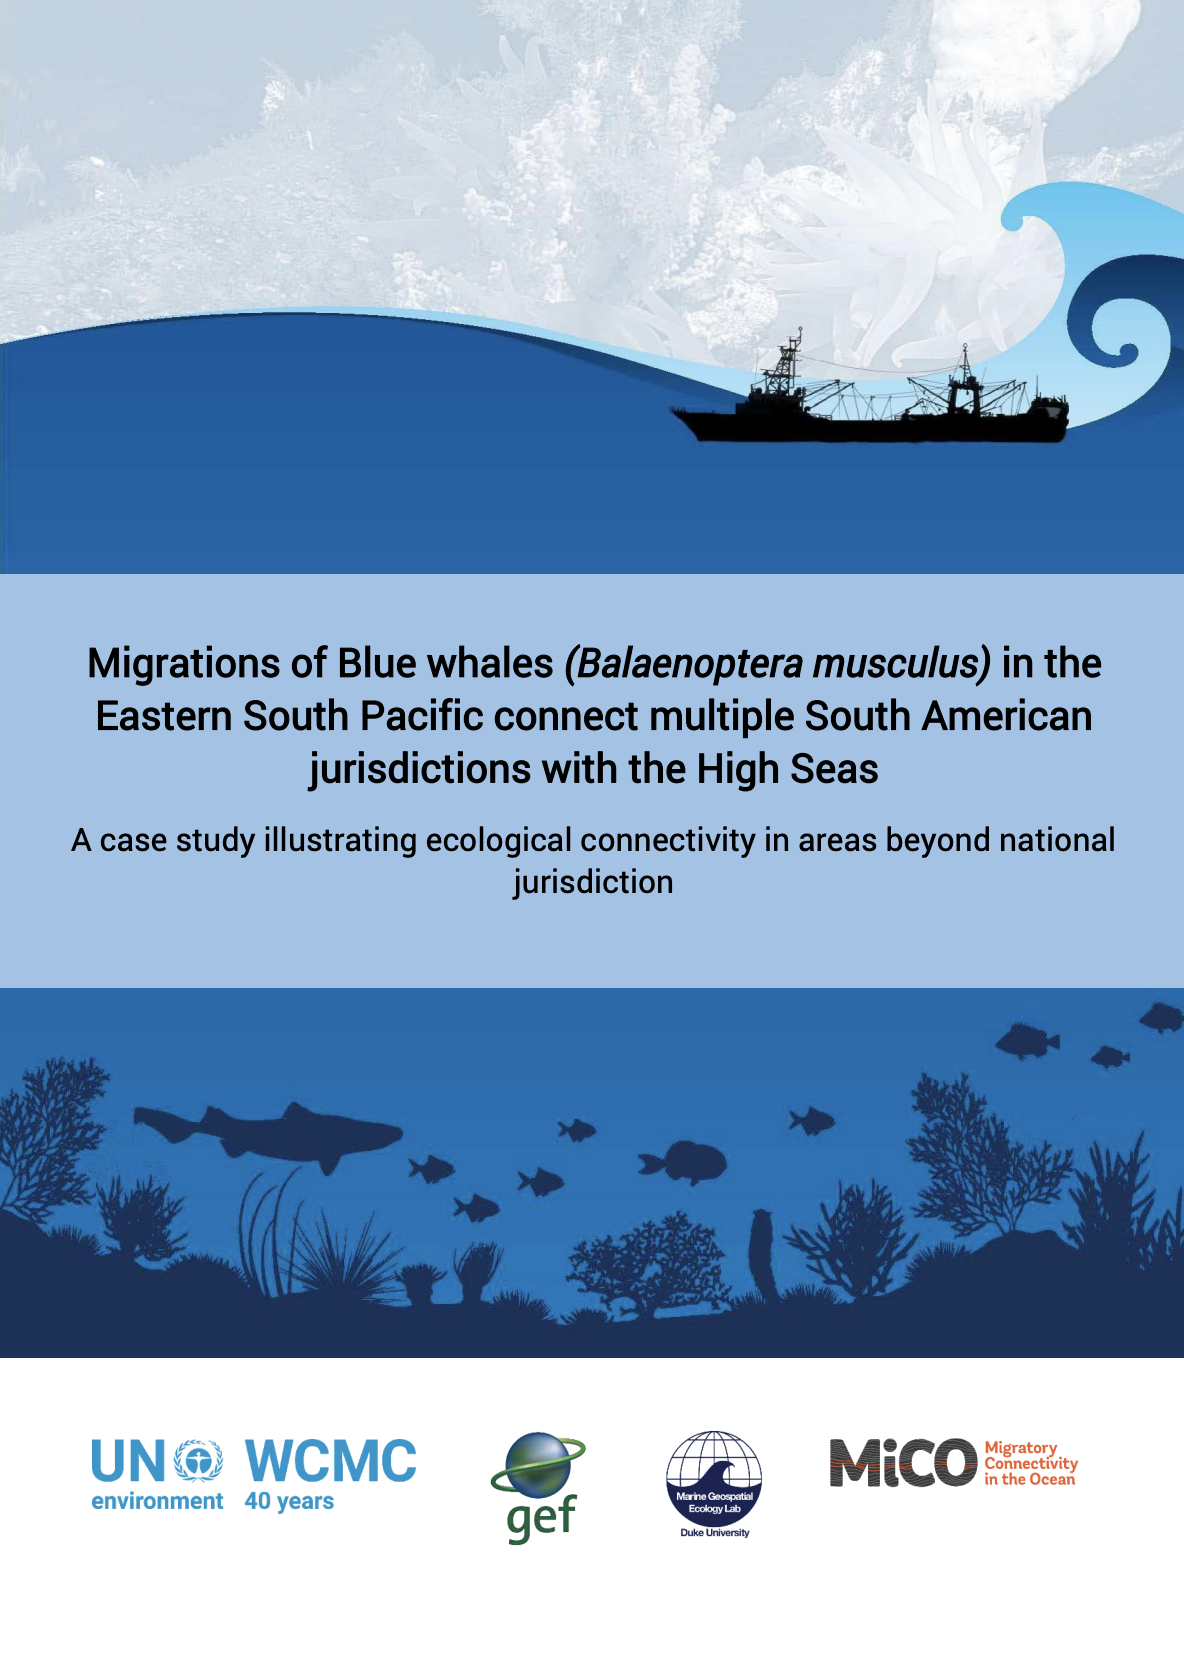 Migrations of Blue whales (Balaenoptera musculus) in the Eastern South Pacific connect multiple South American jurisdictions with the High Seas